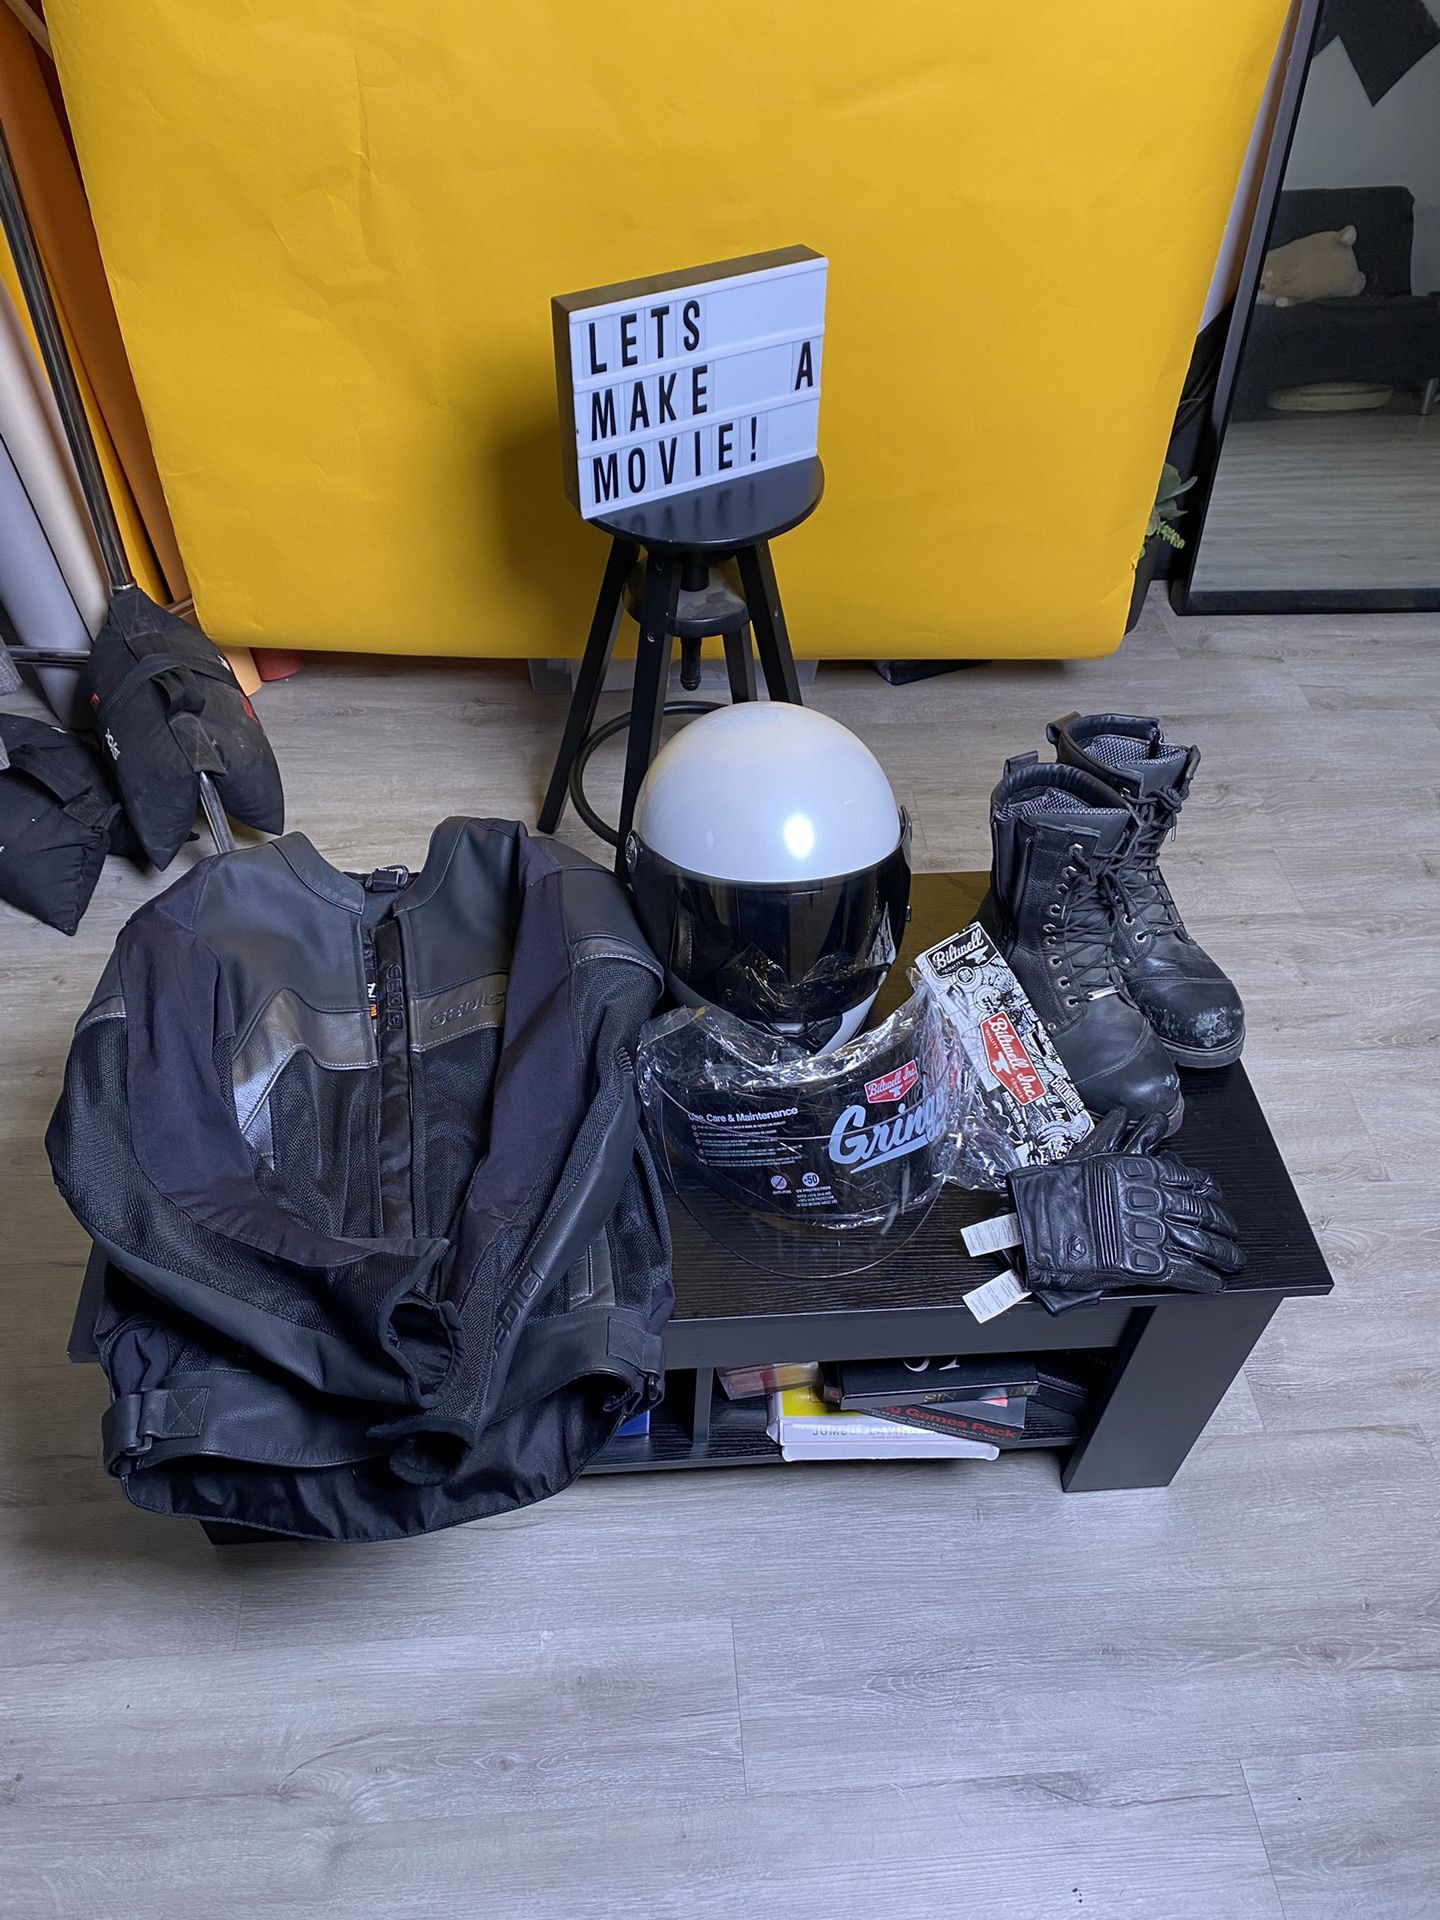 FULL MOTORCYCLE GEAR SET - GREAT FOR BEGINNERS!